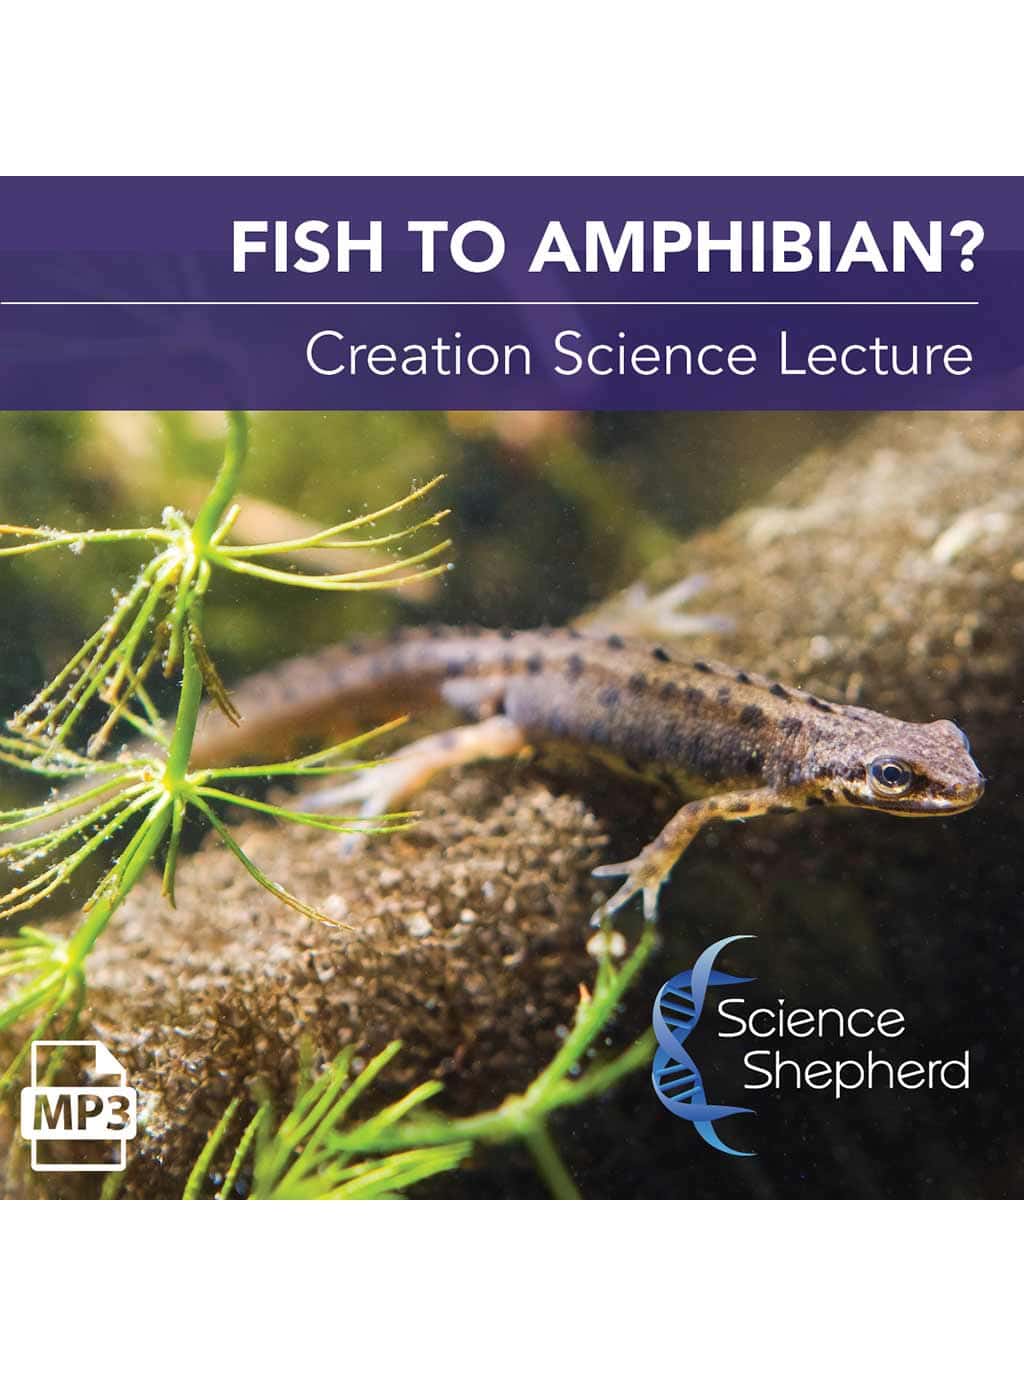 Creation-based science curriculum mp3 lecture Fish to Amphibian? cover